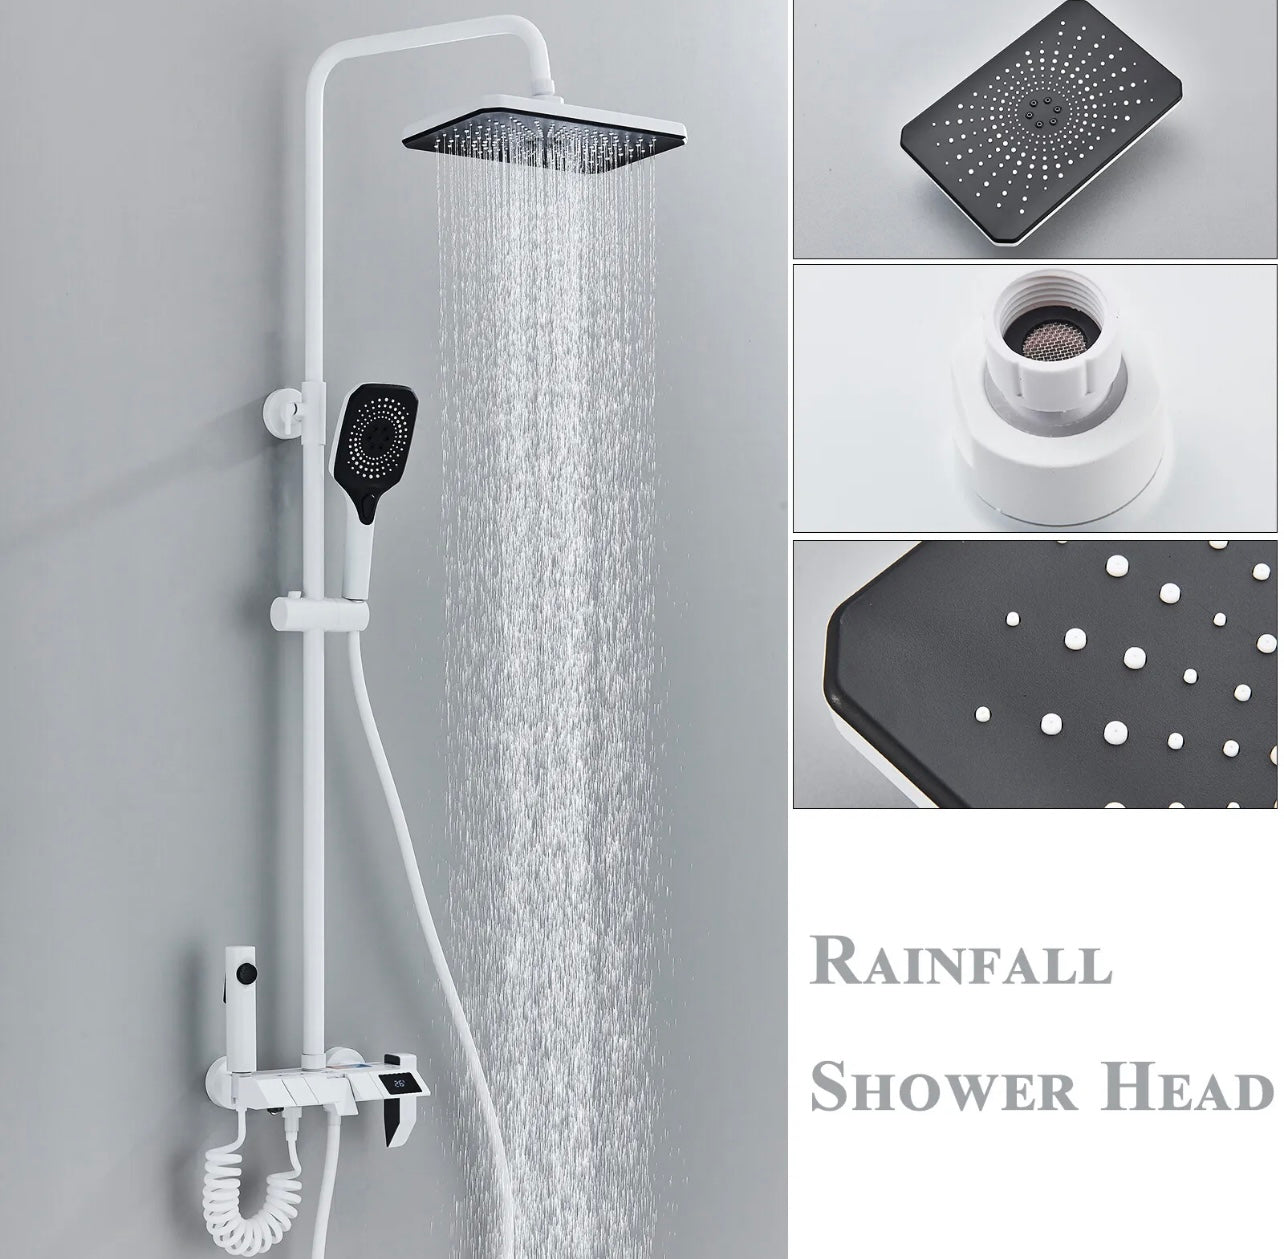 4 In 1 Slim Exposed Shower System Set Rain Shower Head Combo Shower Faucet Fixtures W/LCD Display